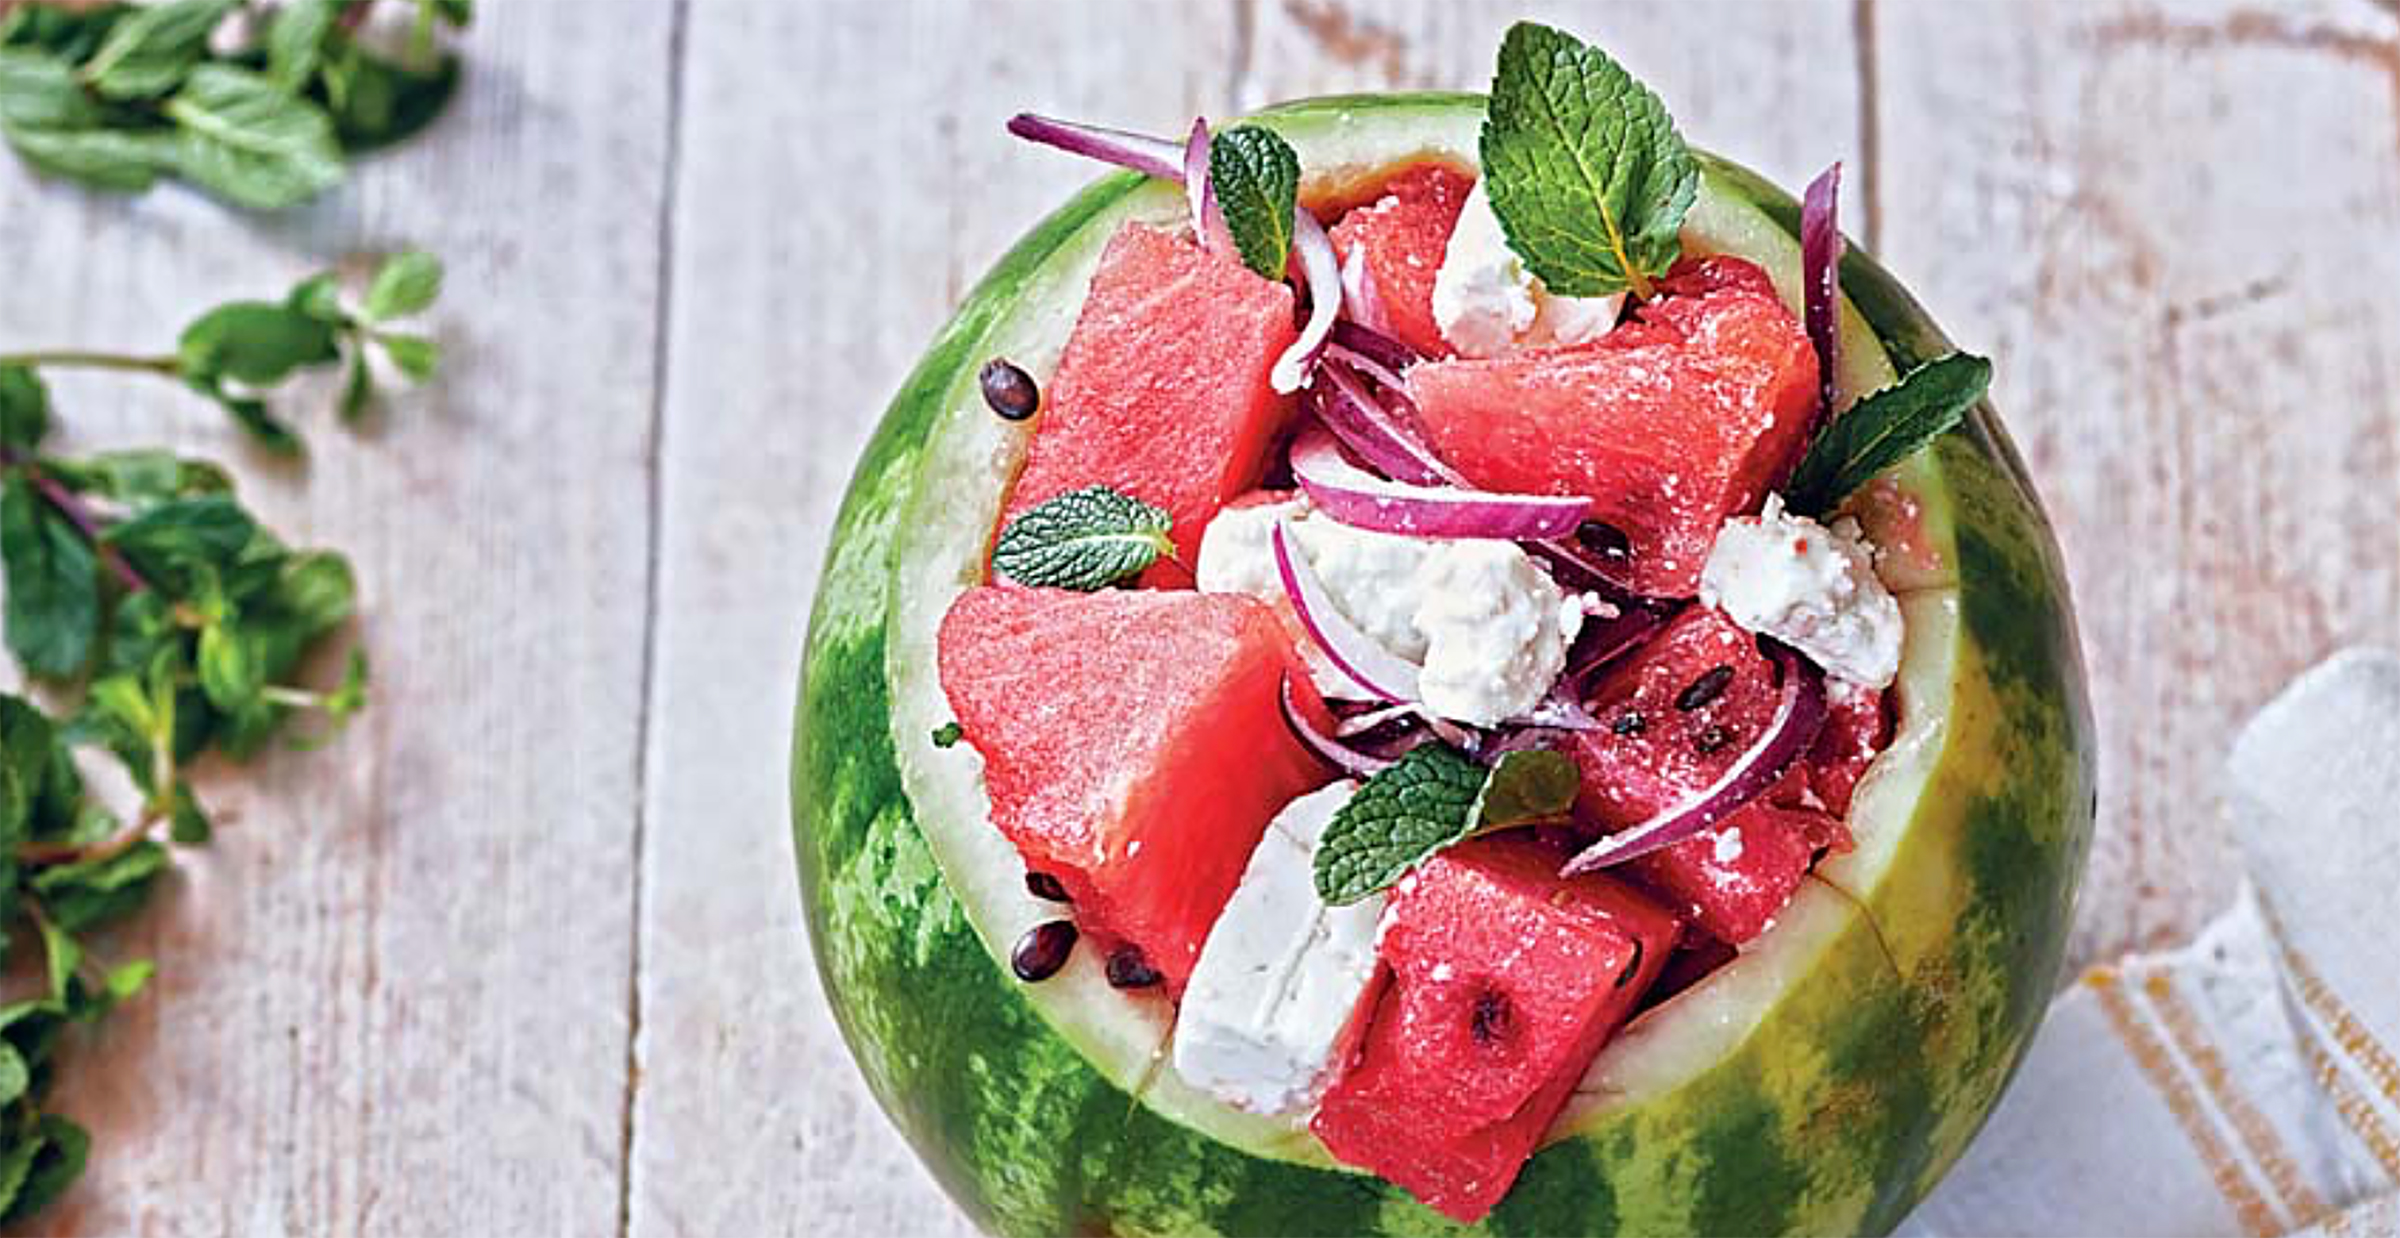 Flavors: Watermelon, Feta and Red Onion Salad with Mint